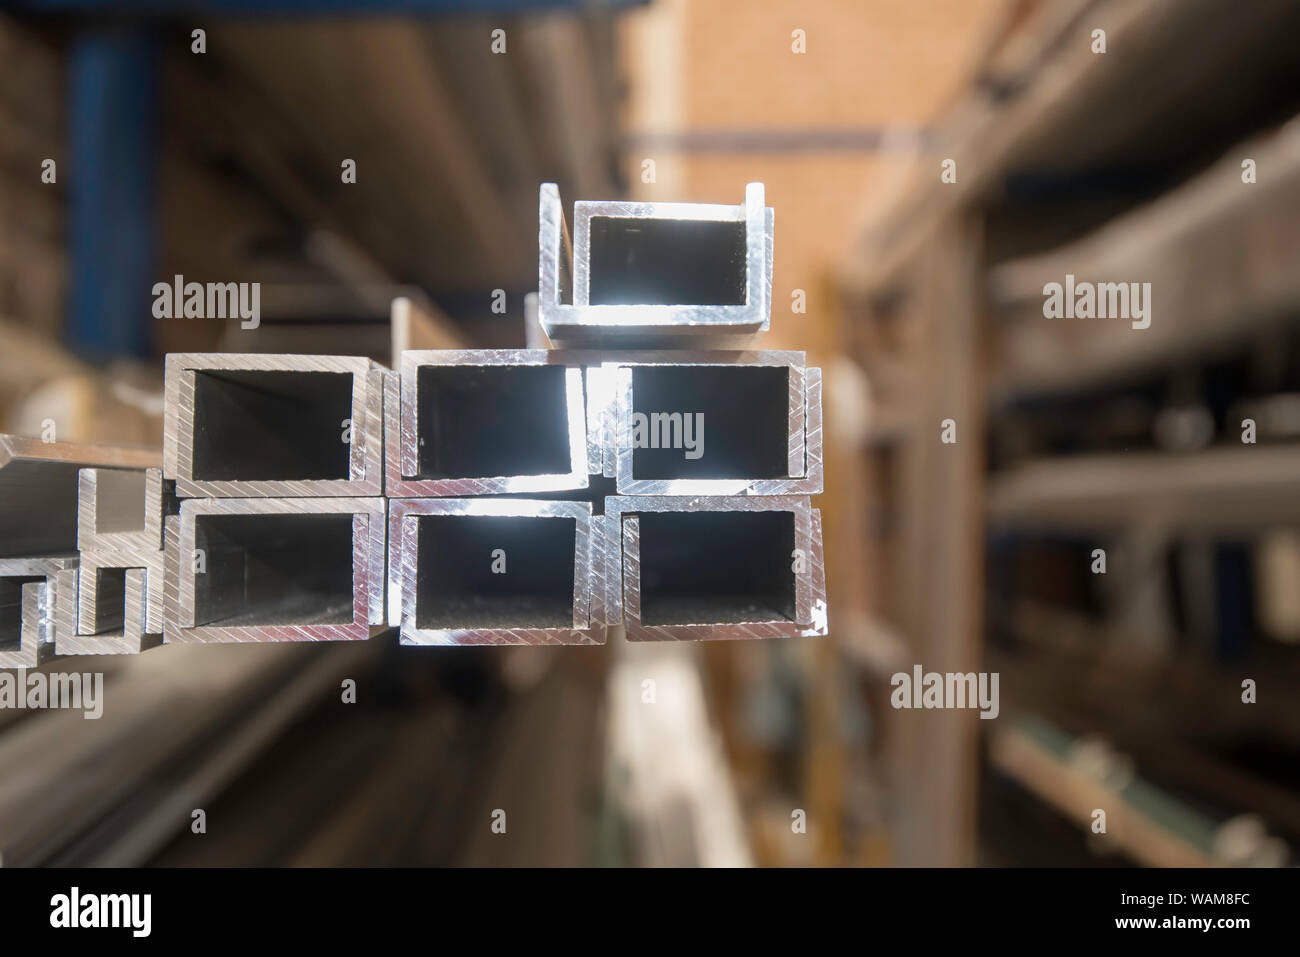 Milled lengths of Aluminium alloy extrusion profiles sitting on racking in a warehouse and lit with natural light Stock Photo